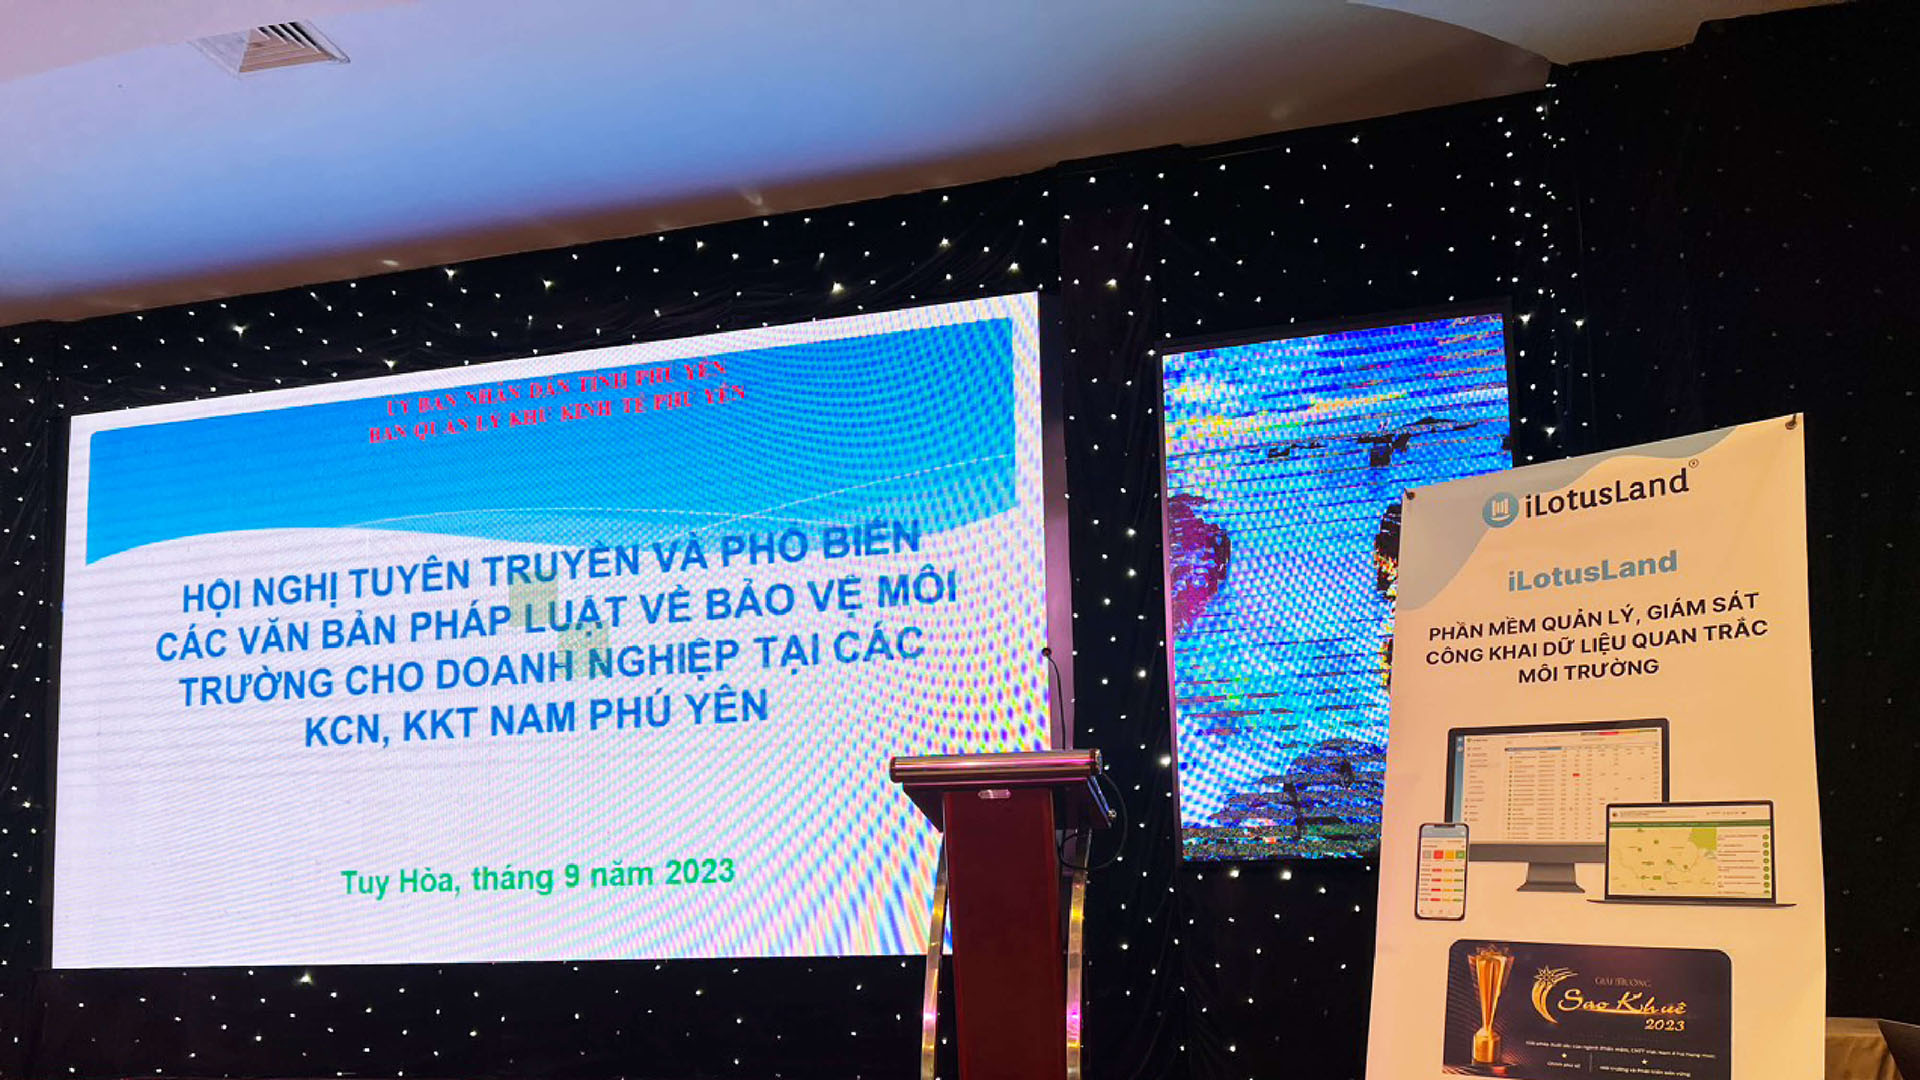 Viet An Central region participates in the Conference to propagate and disseminate legal documents in Industrial Parks and Economic Zones of South Phu Yen